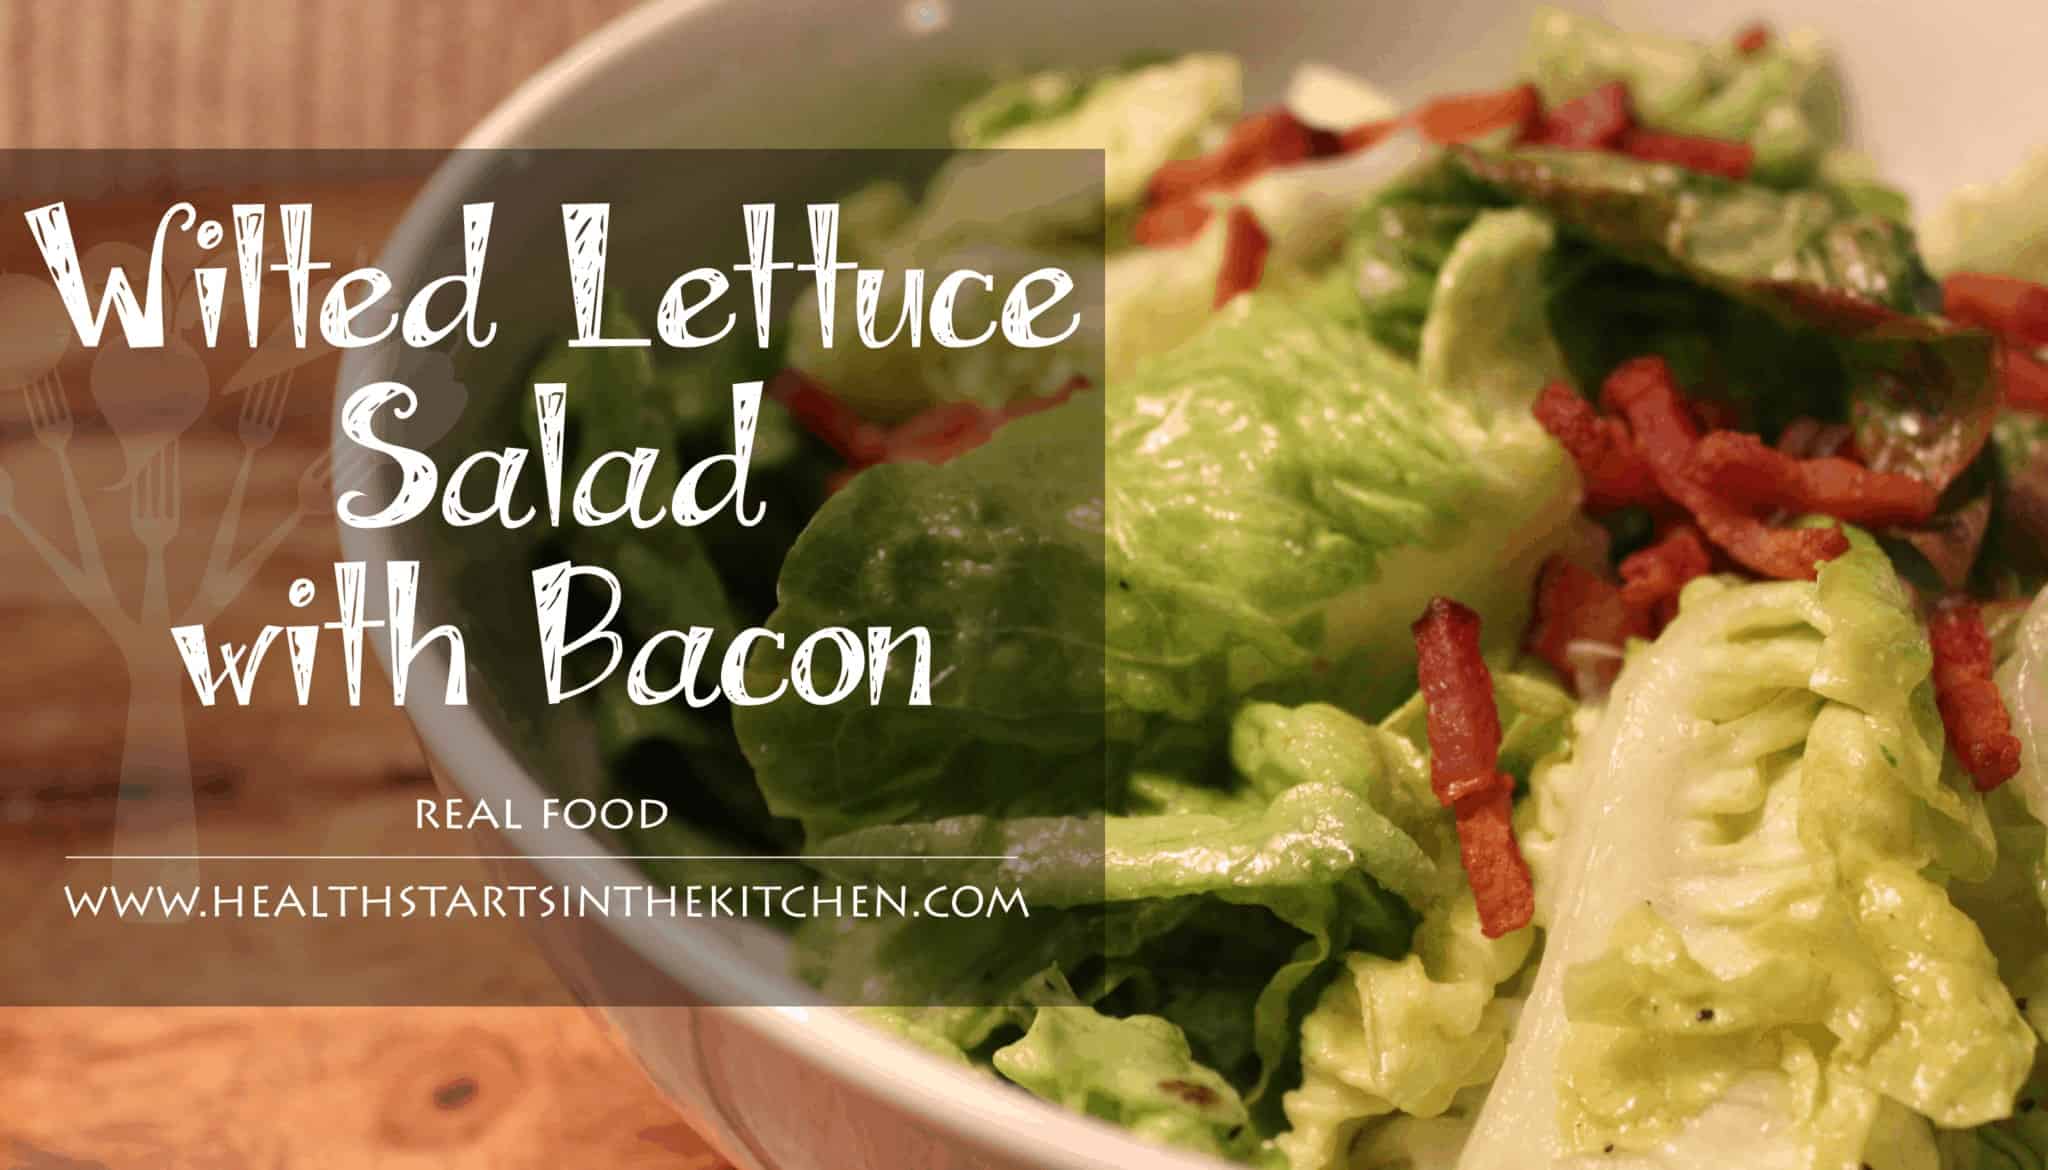 Wilted Lettuce Salad with Bacon